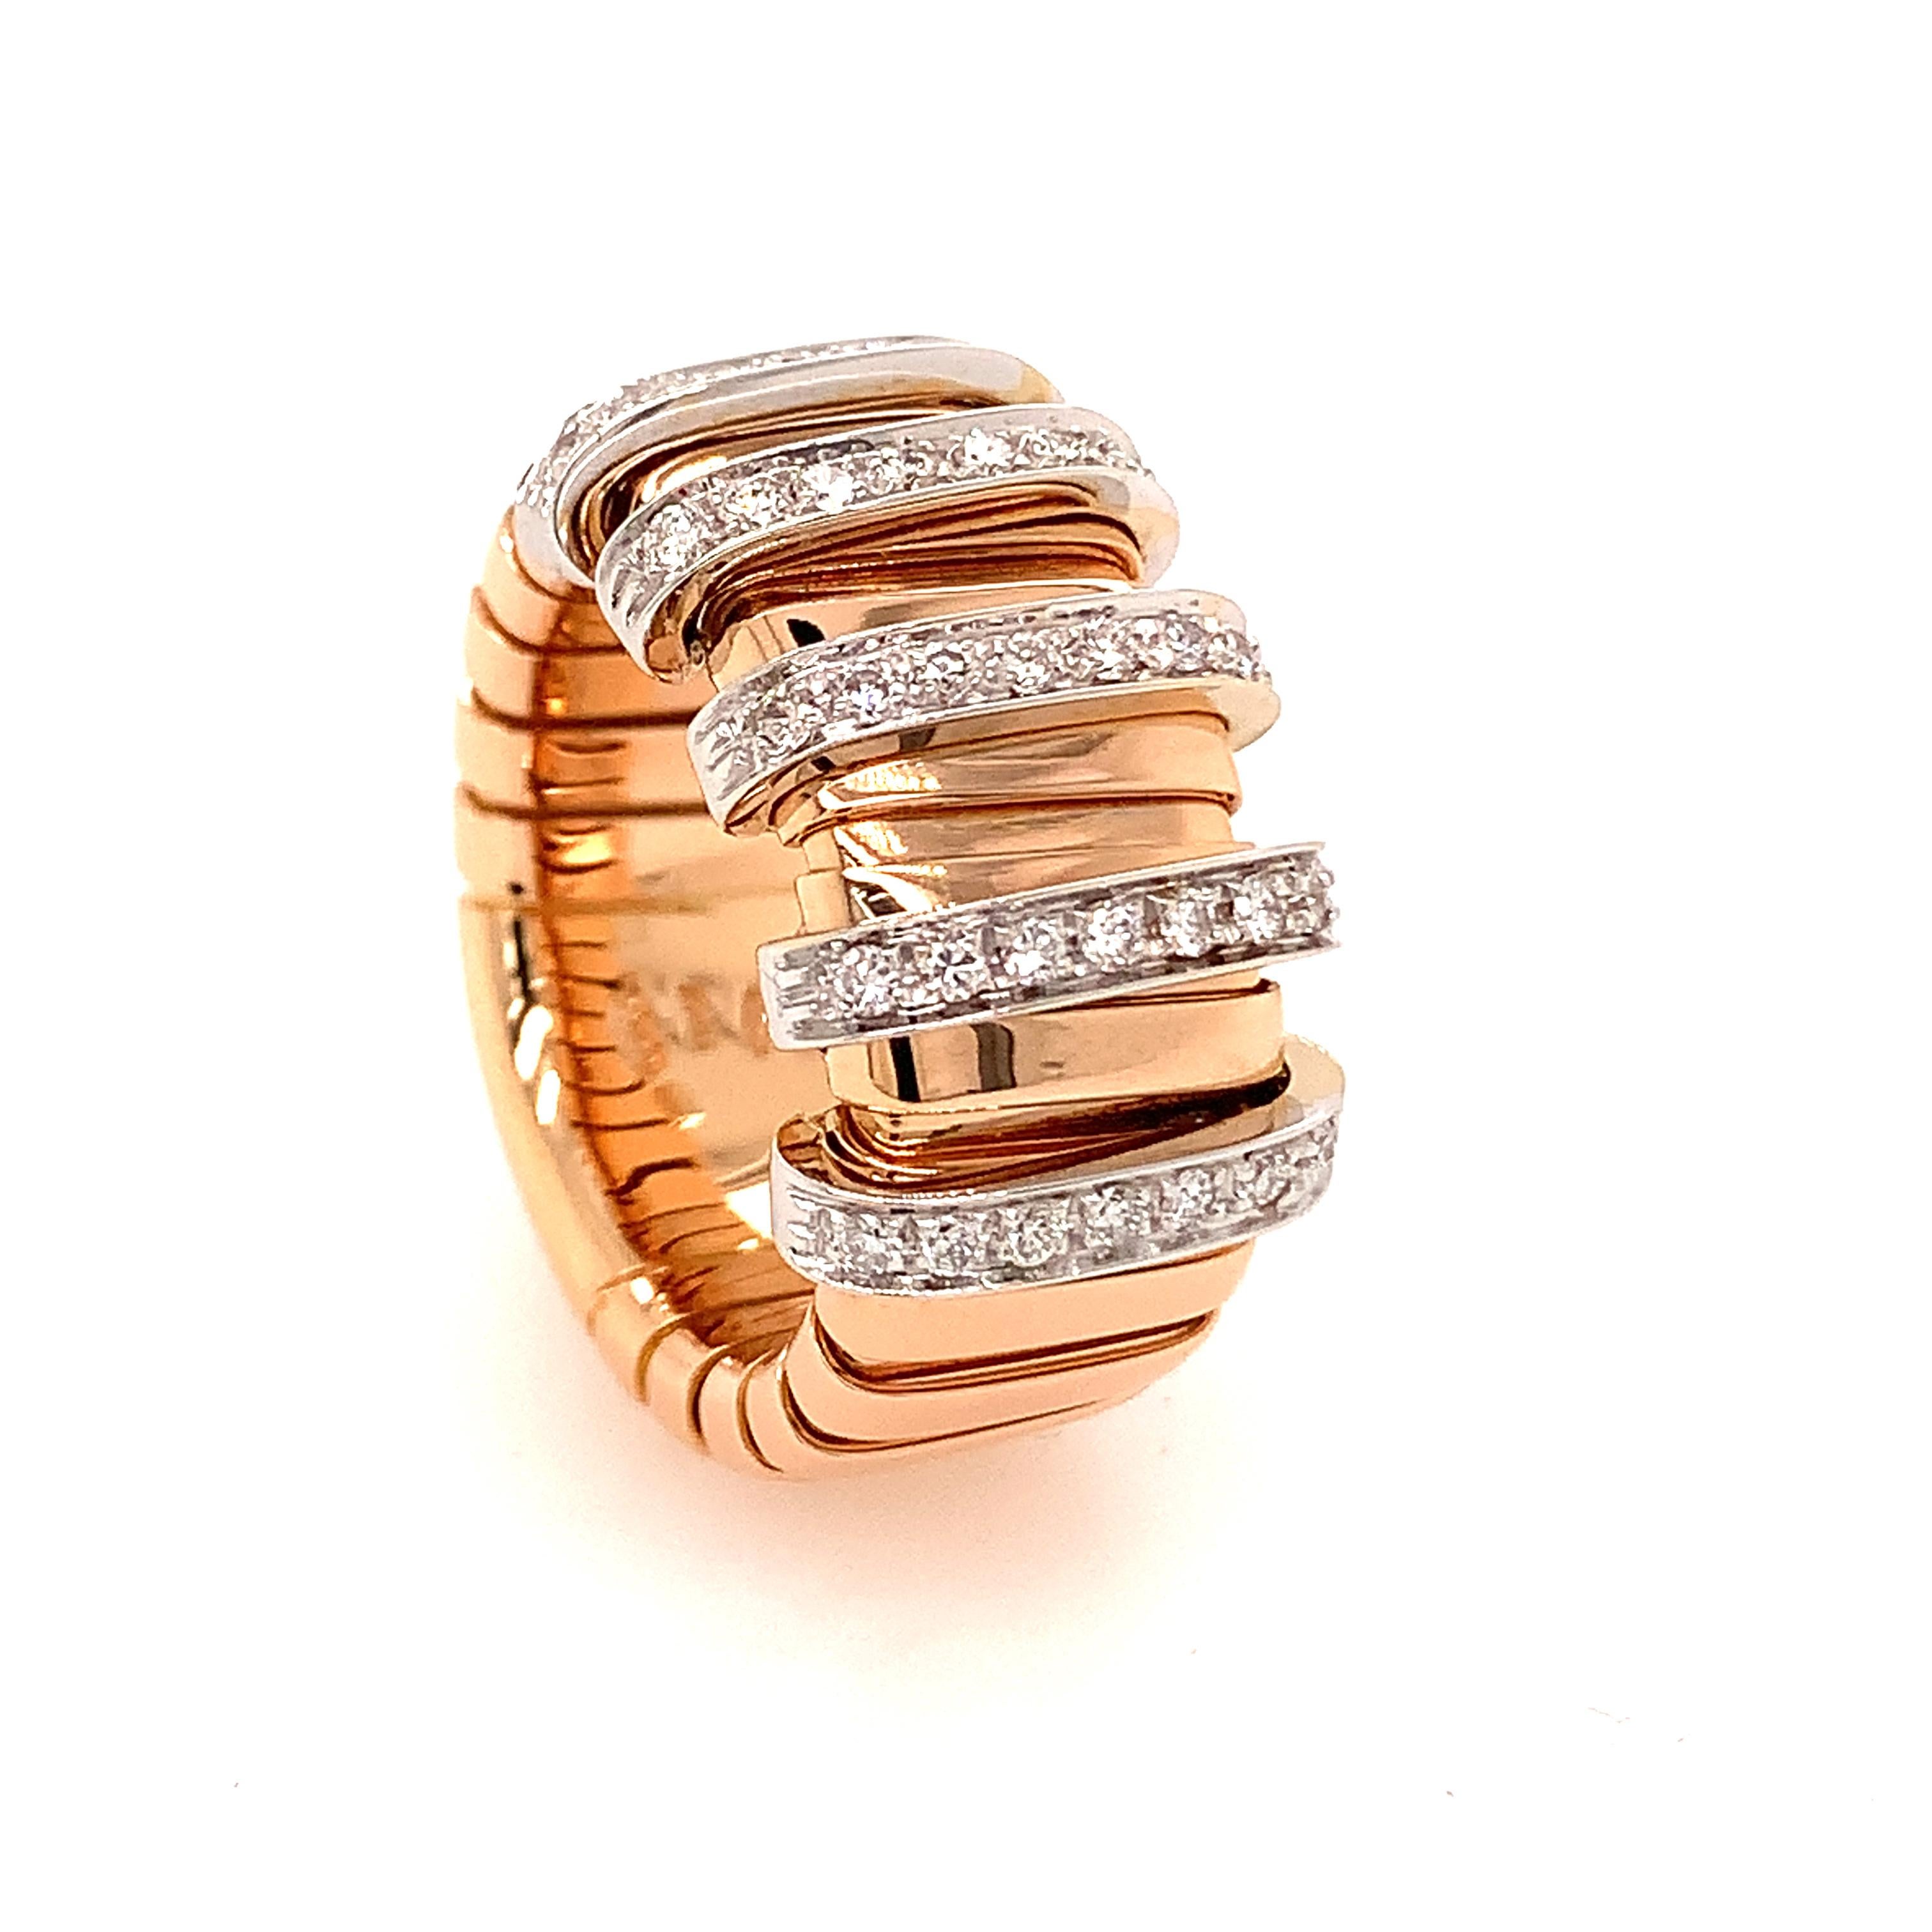 Women's 18kt Rose Gold Tubo Gas Flat Ring with Diamond Stations